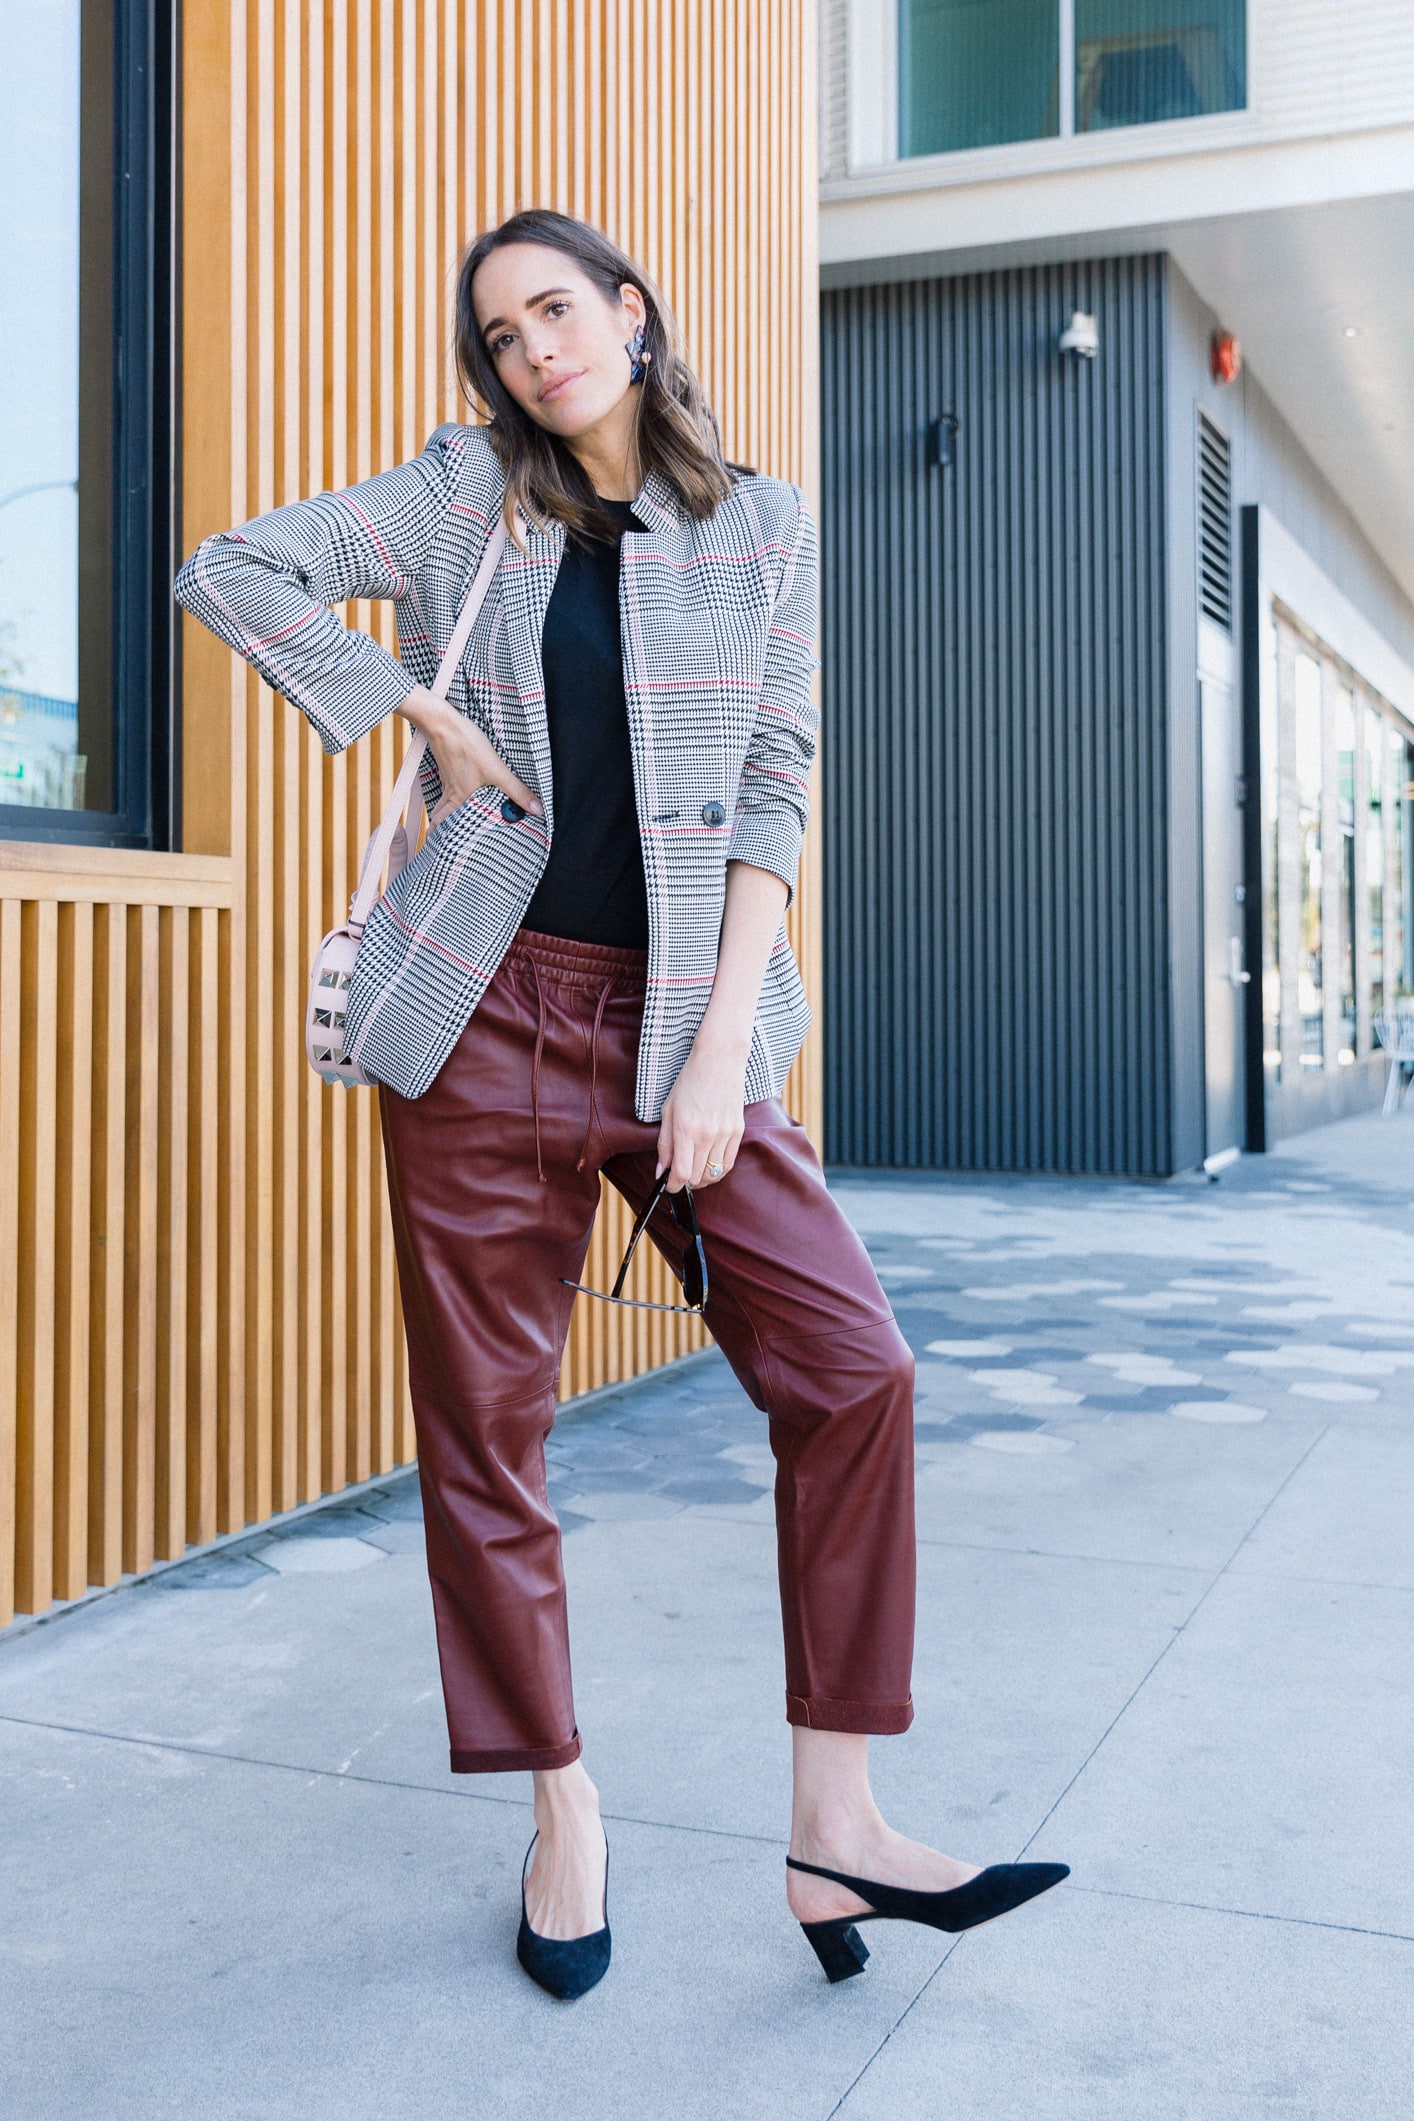 Louise Roe Spring Work Outfit With Leather Trousers Anine Bing Blazer And M. Gemi Heels